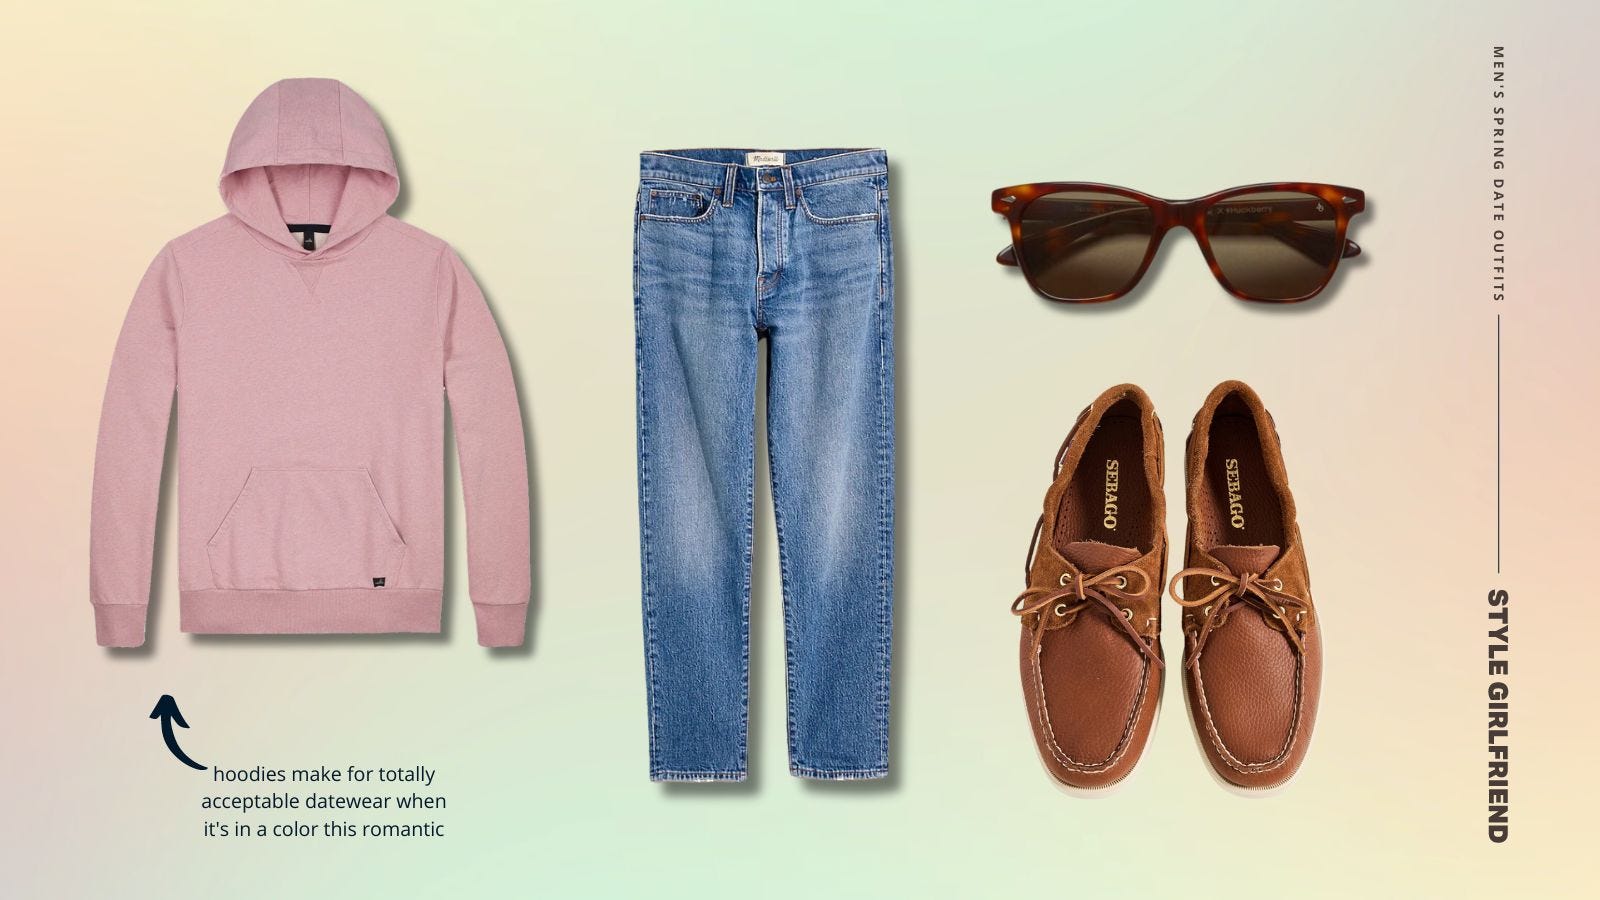 collage of men's clothing items for a spring date. items include a pink hoodie sweatshirt, blue jeans, tortoiseshell sunglasses, and brown lace-up boat shoes